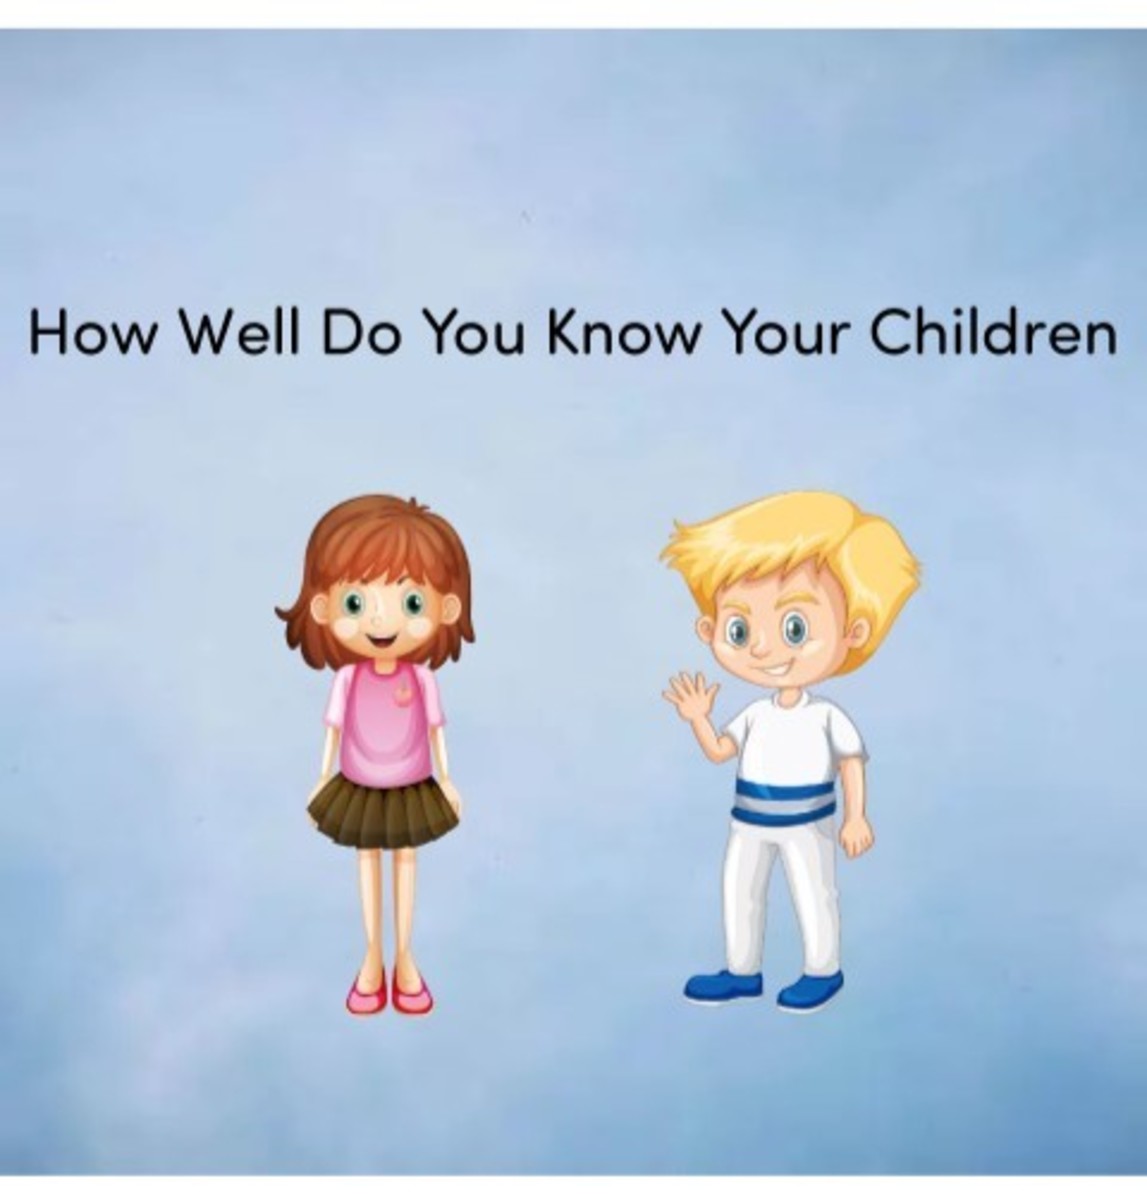 How Well Do You Know Your Children?